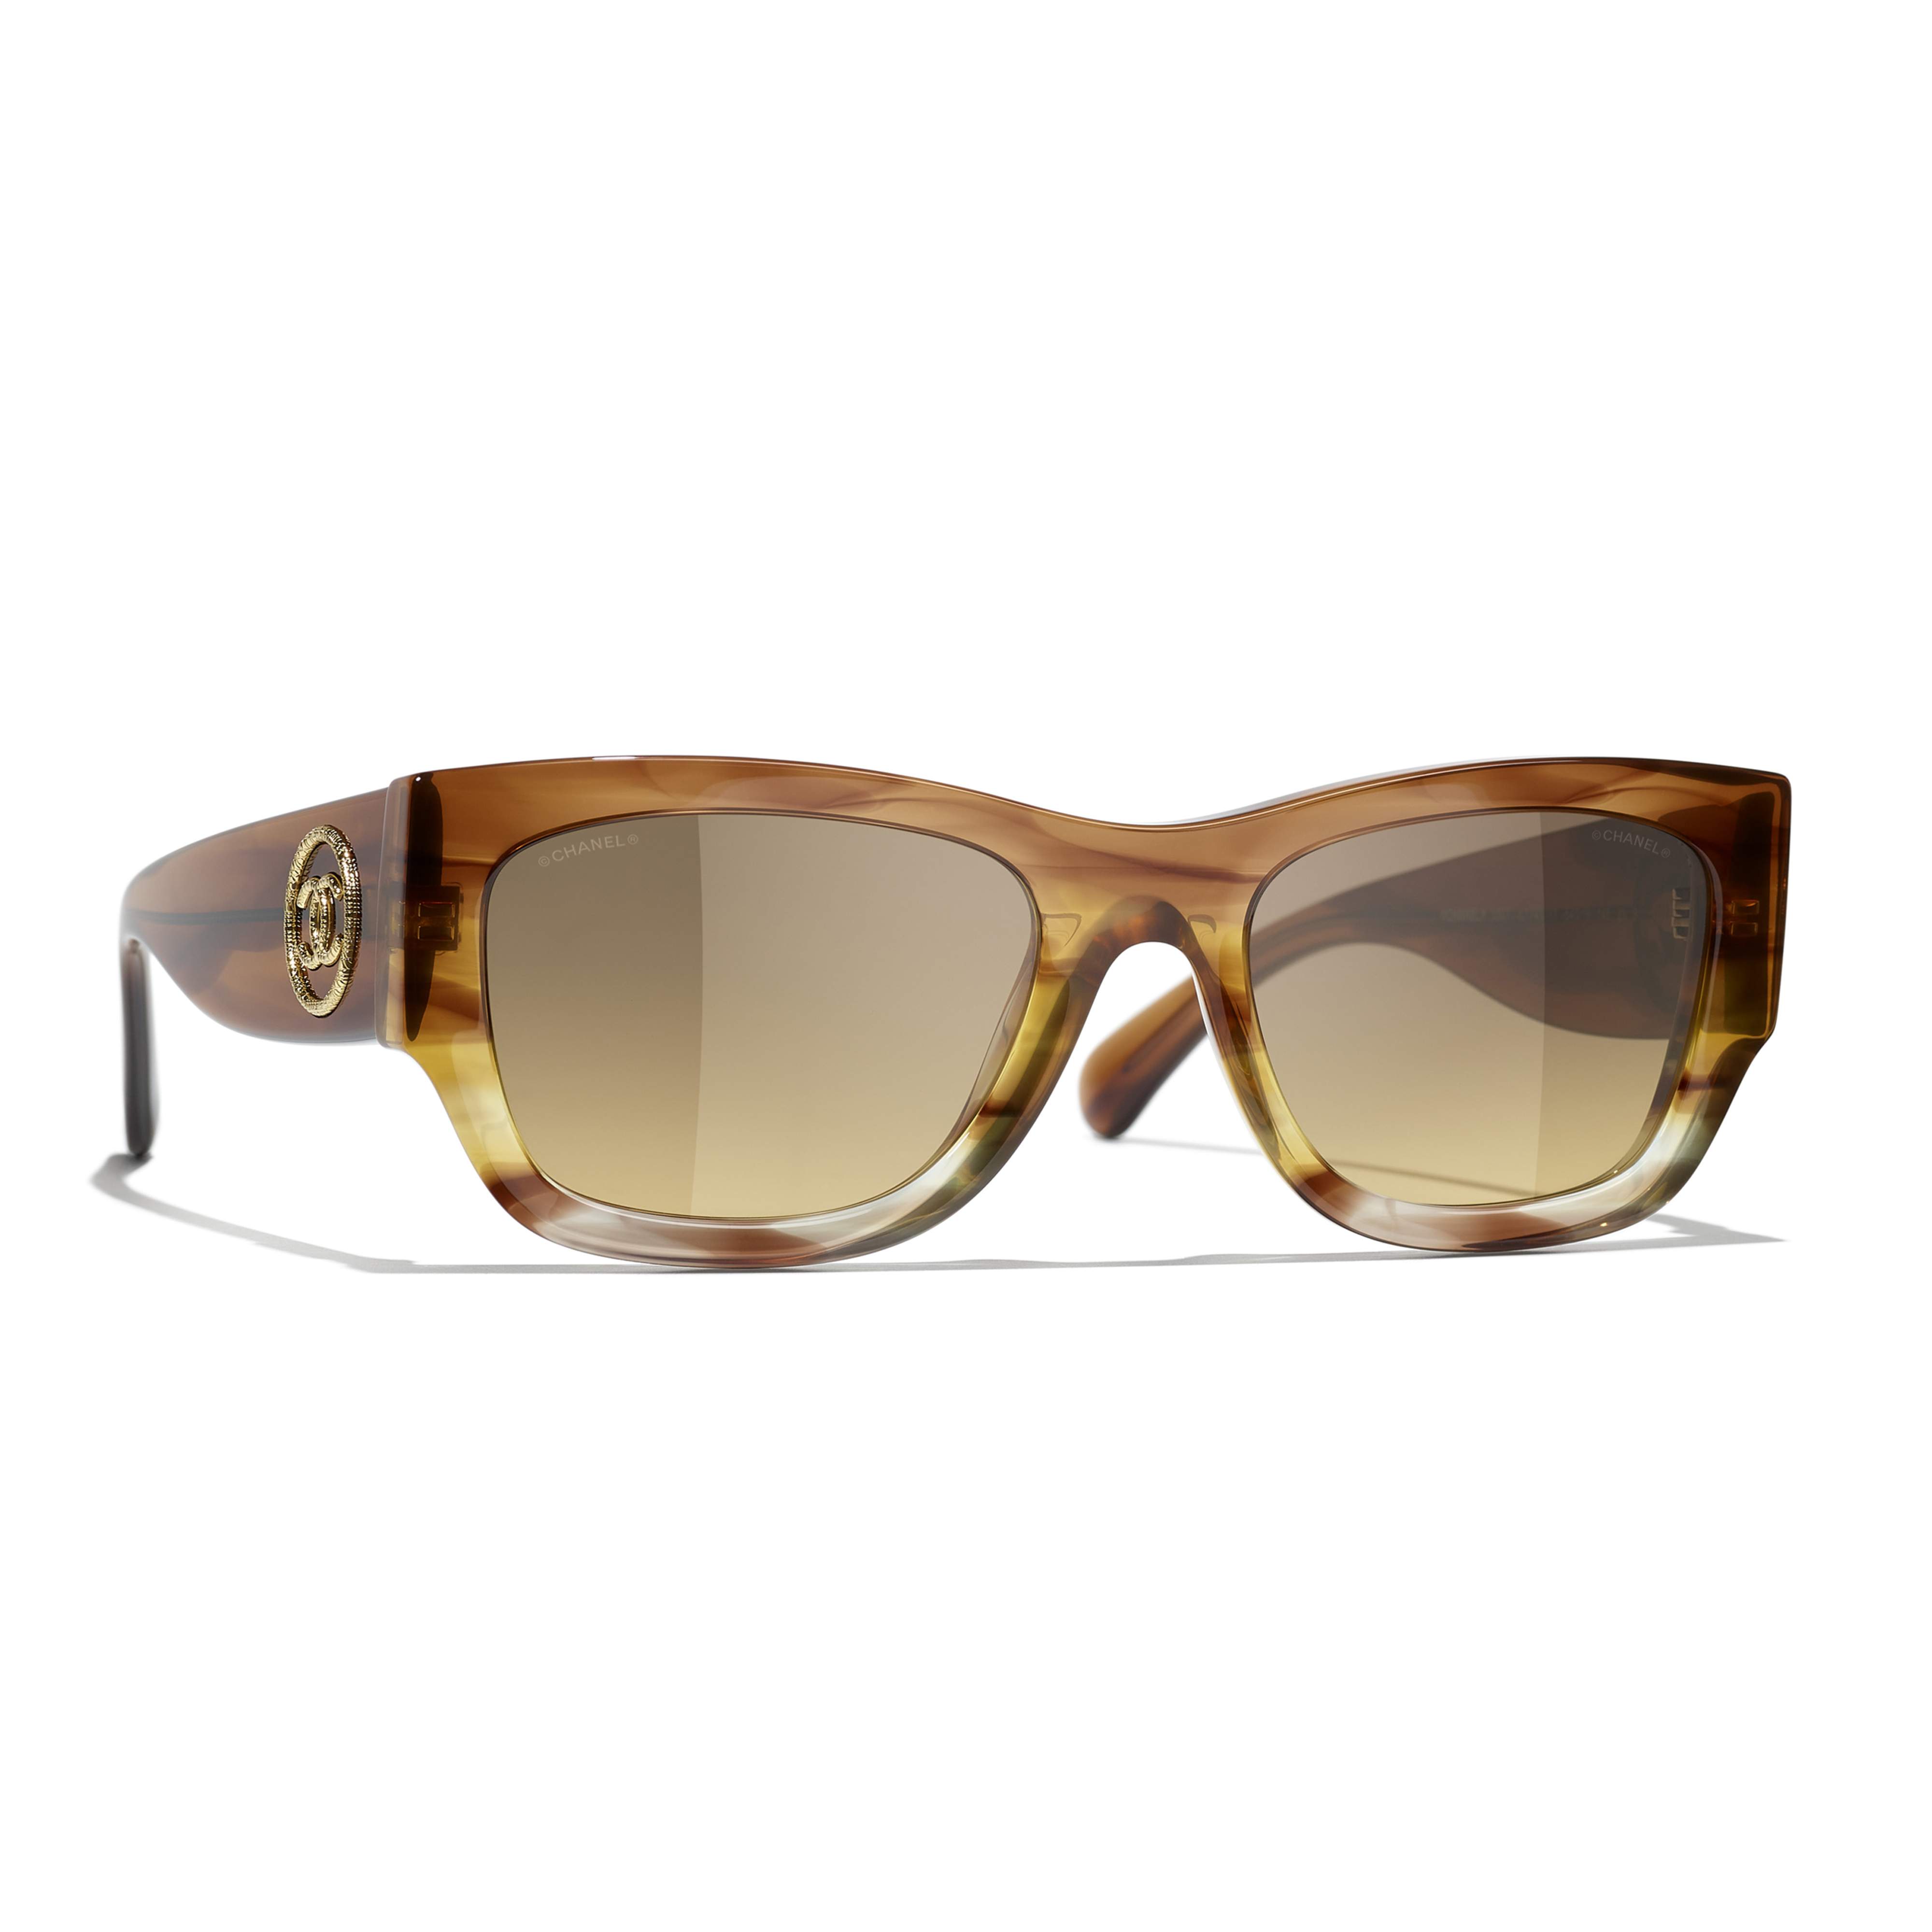 Sunglasses CHANEL CH5507 174511 54-19 Brown Gradient Yellow in